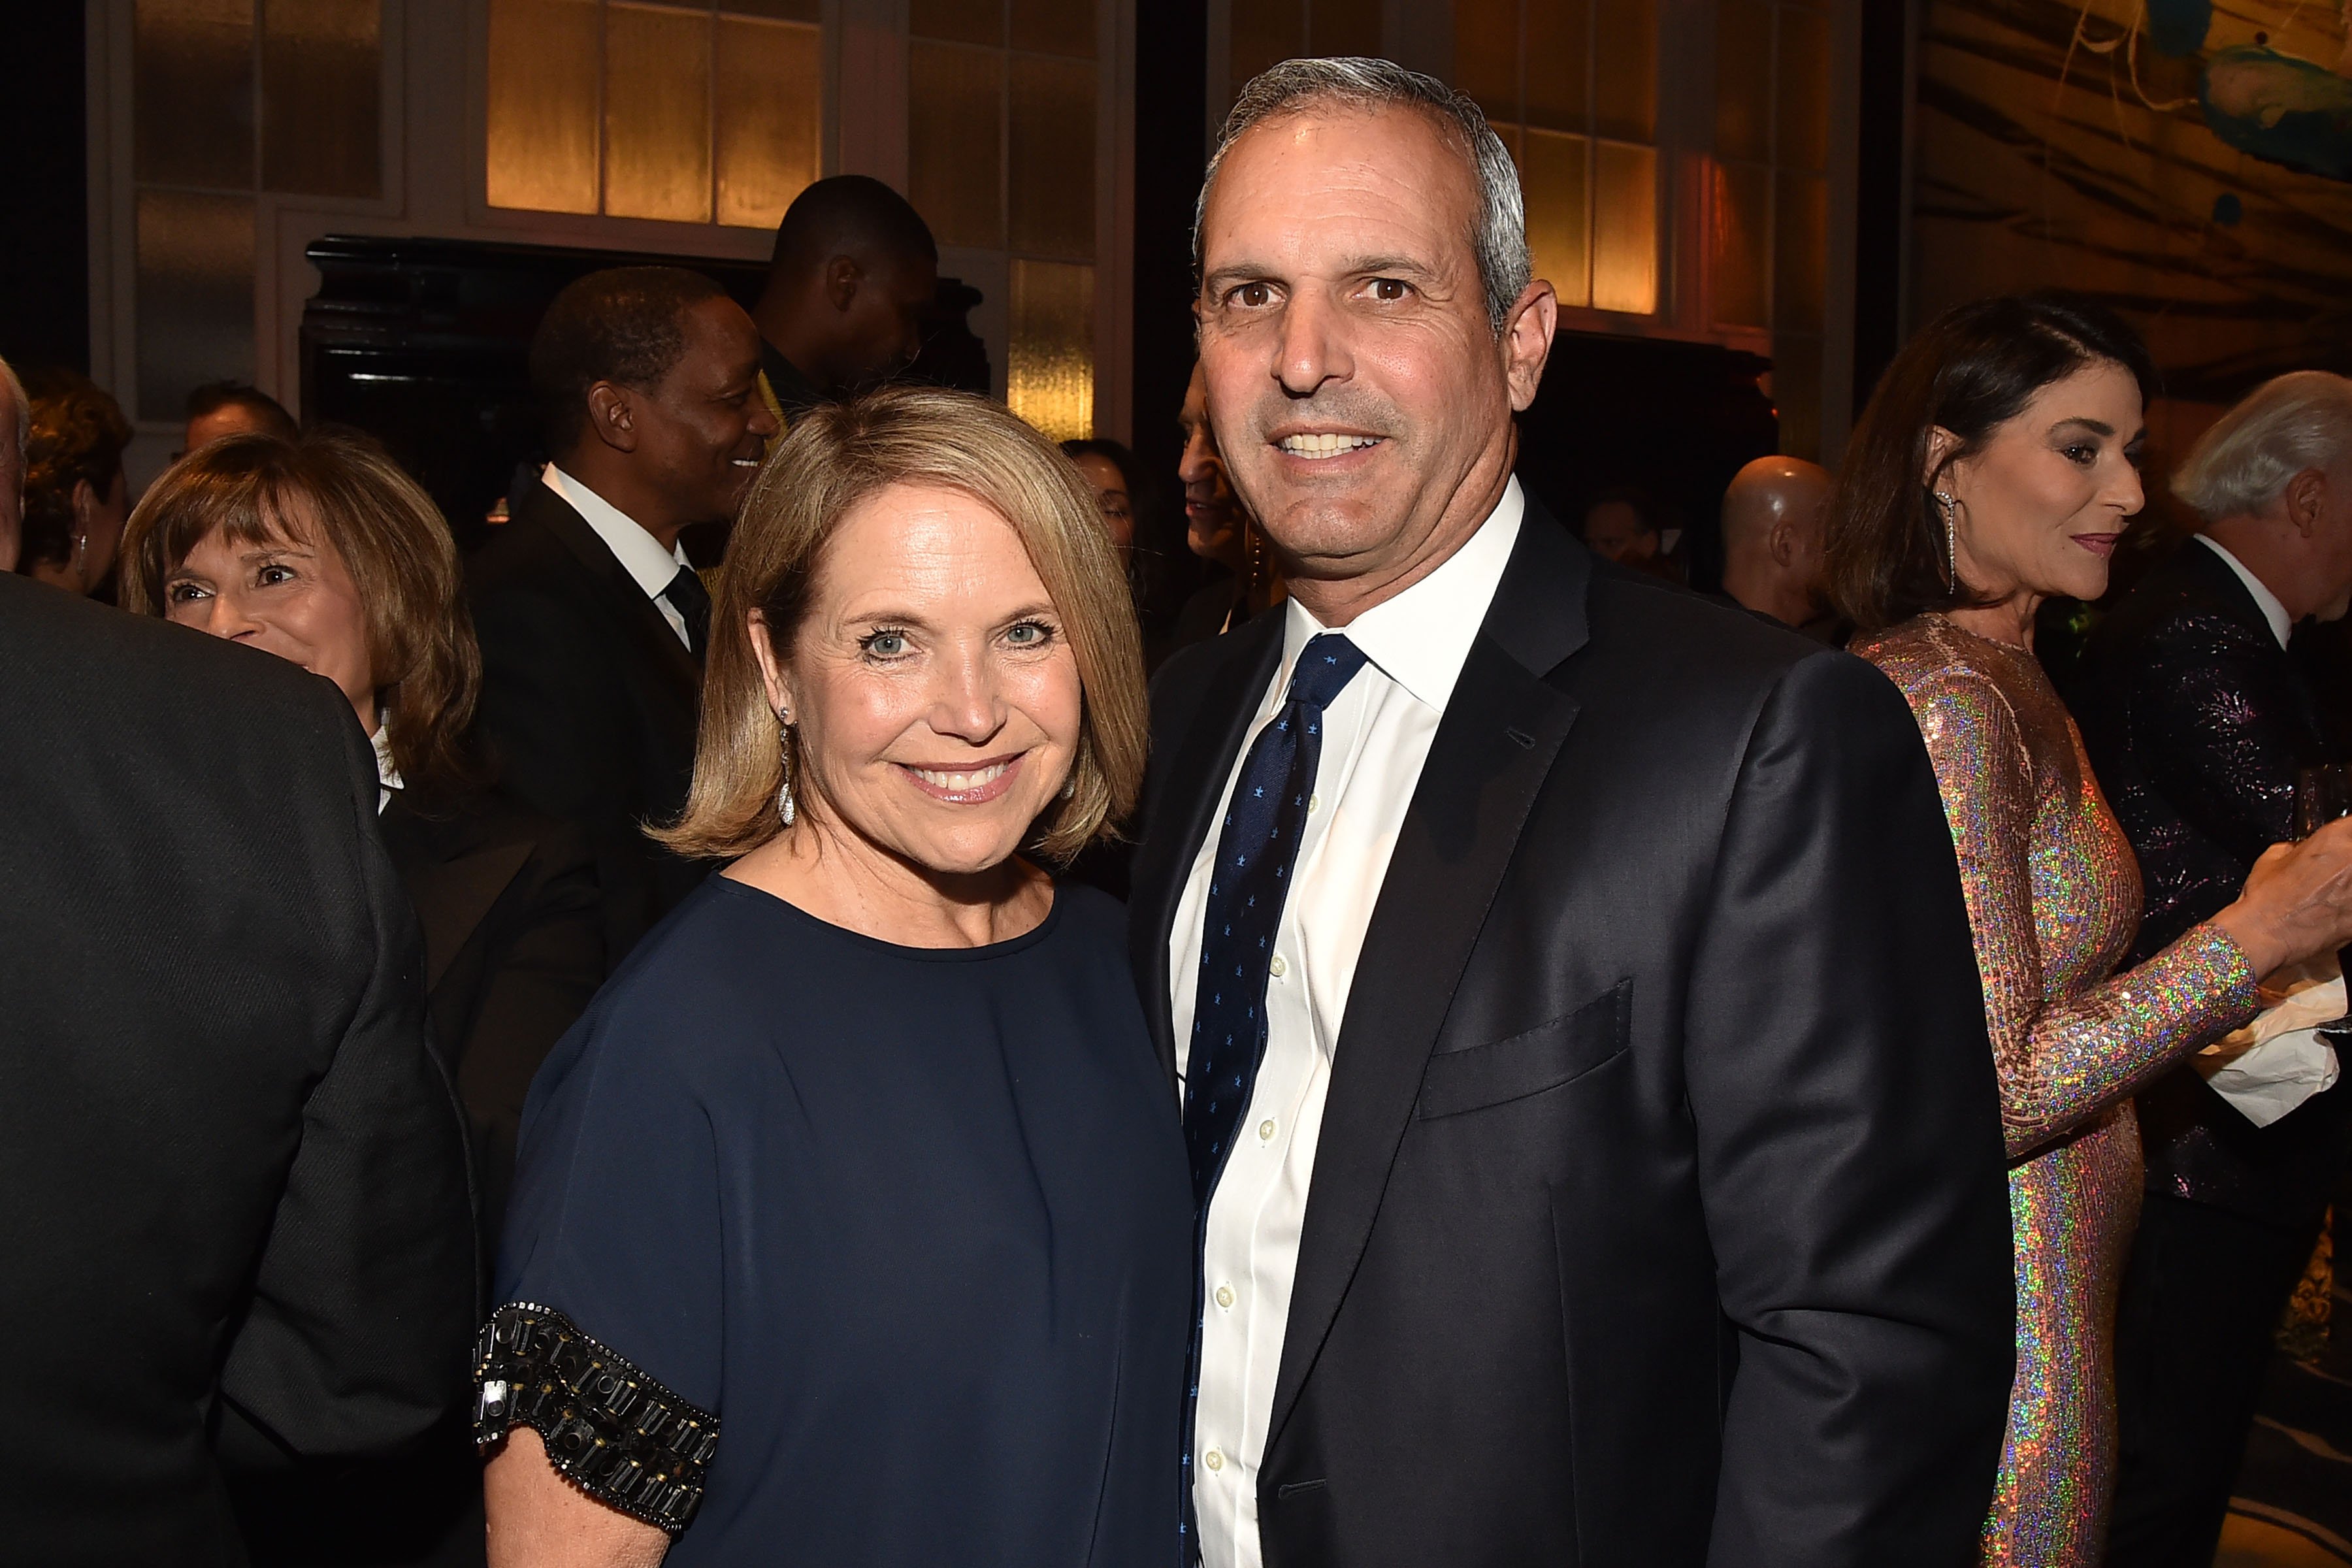 Katie Couric and John Molner at the Clive's Milestone Birthday Gala in New York on April 6, 2022 | Source: Getty Images